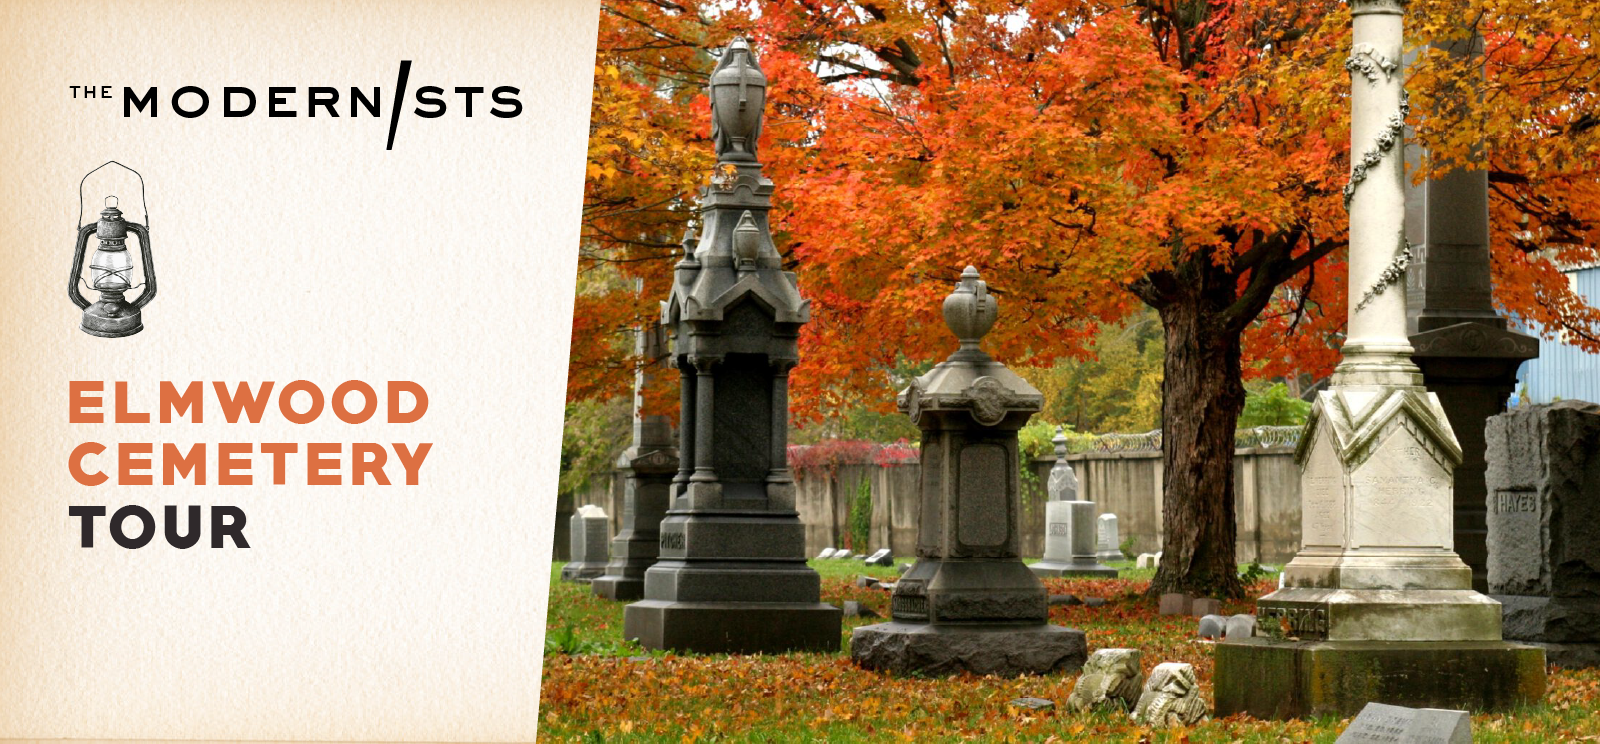 Image: Modern photo of old stone grave markers and monuments surrounded by trees with orange and yellow leaves. Text: The Modernists / Elmwood Cemetery Tour